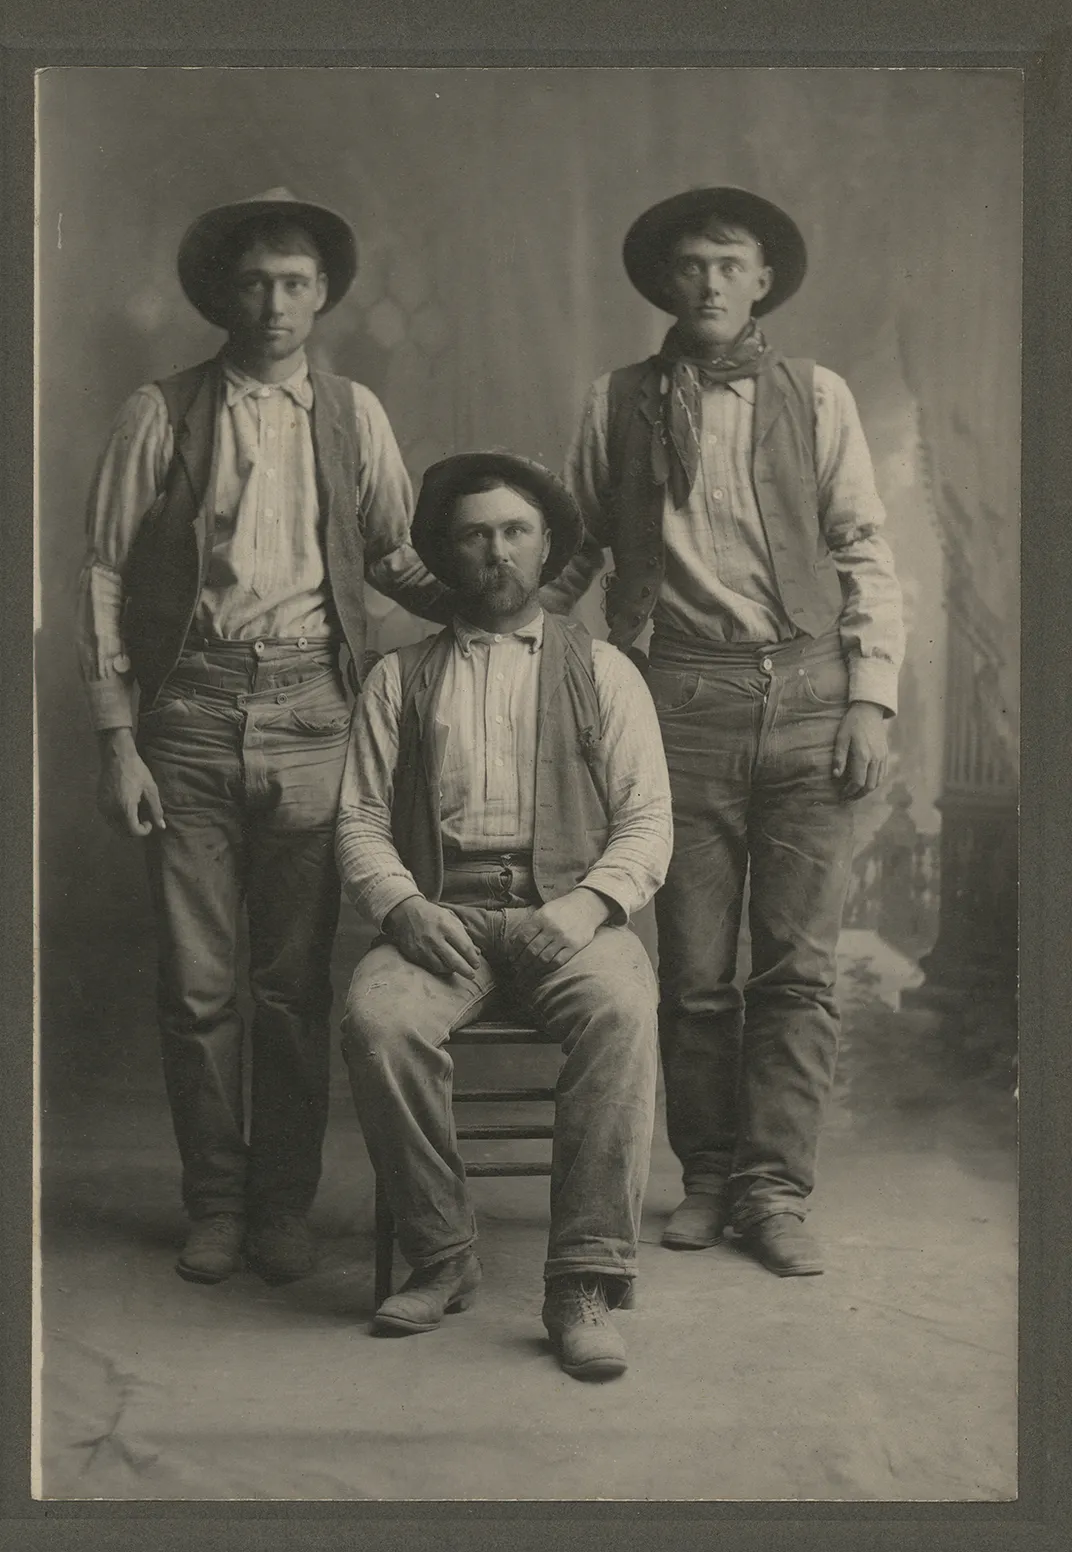 A trio of miners wearing blue jeans